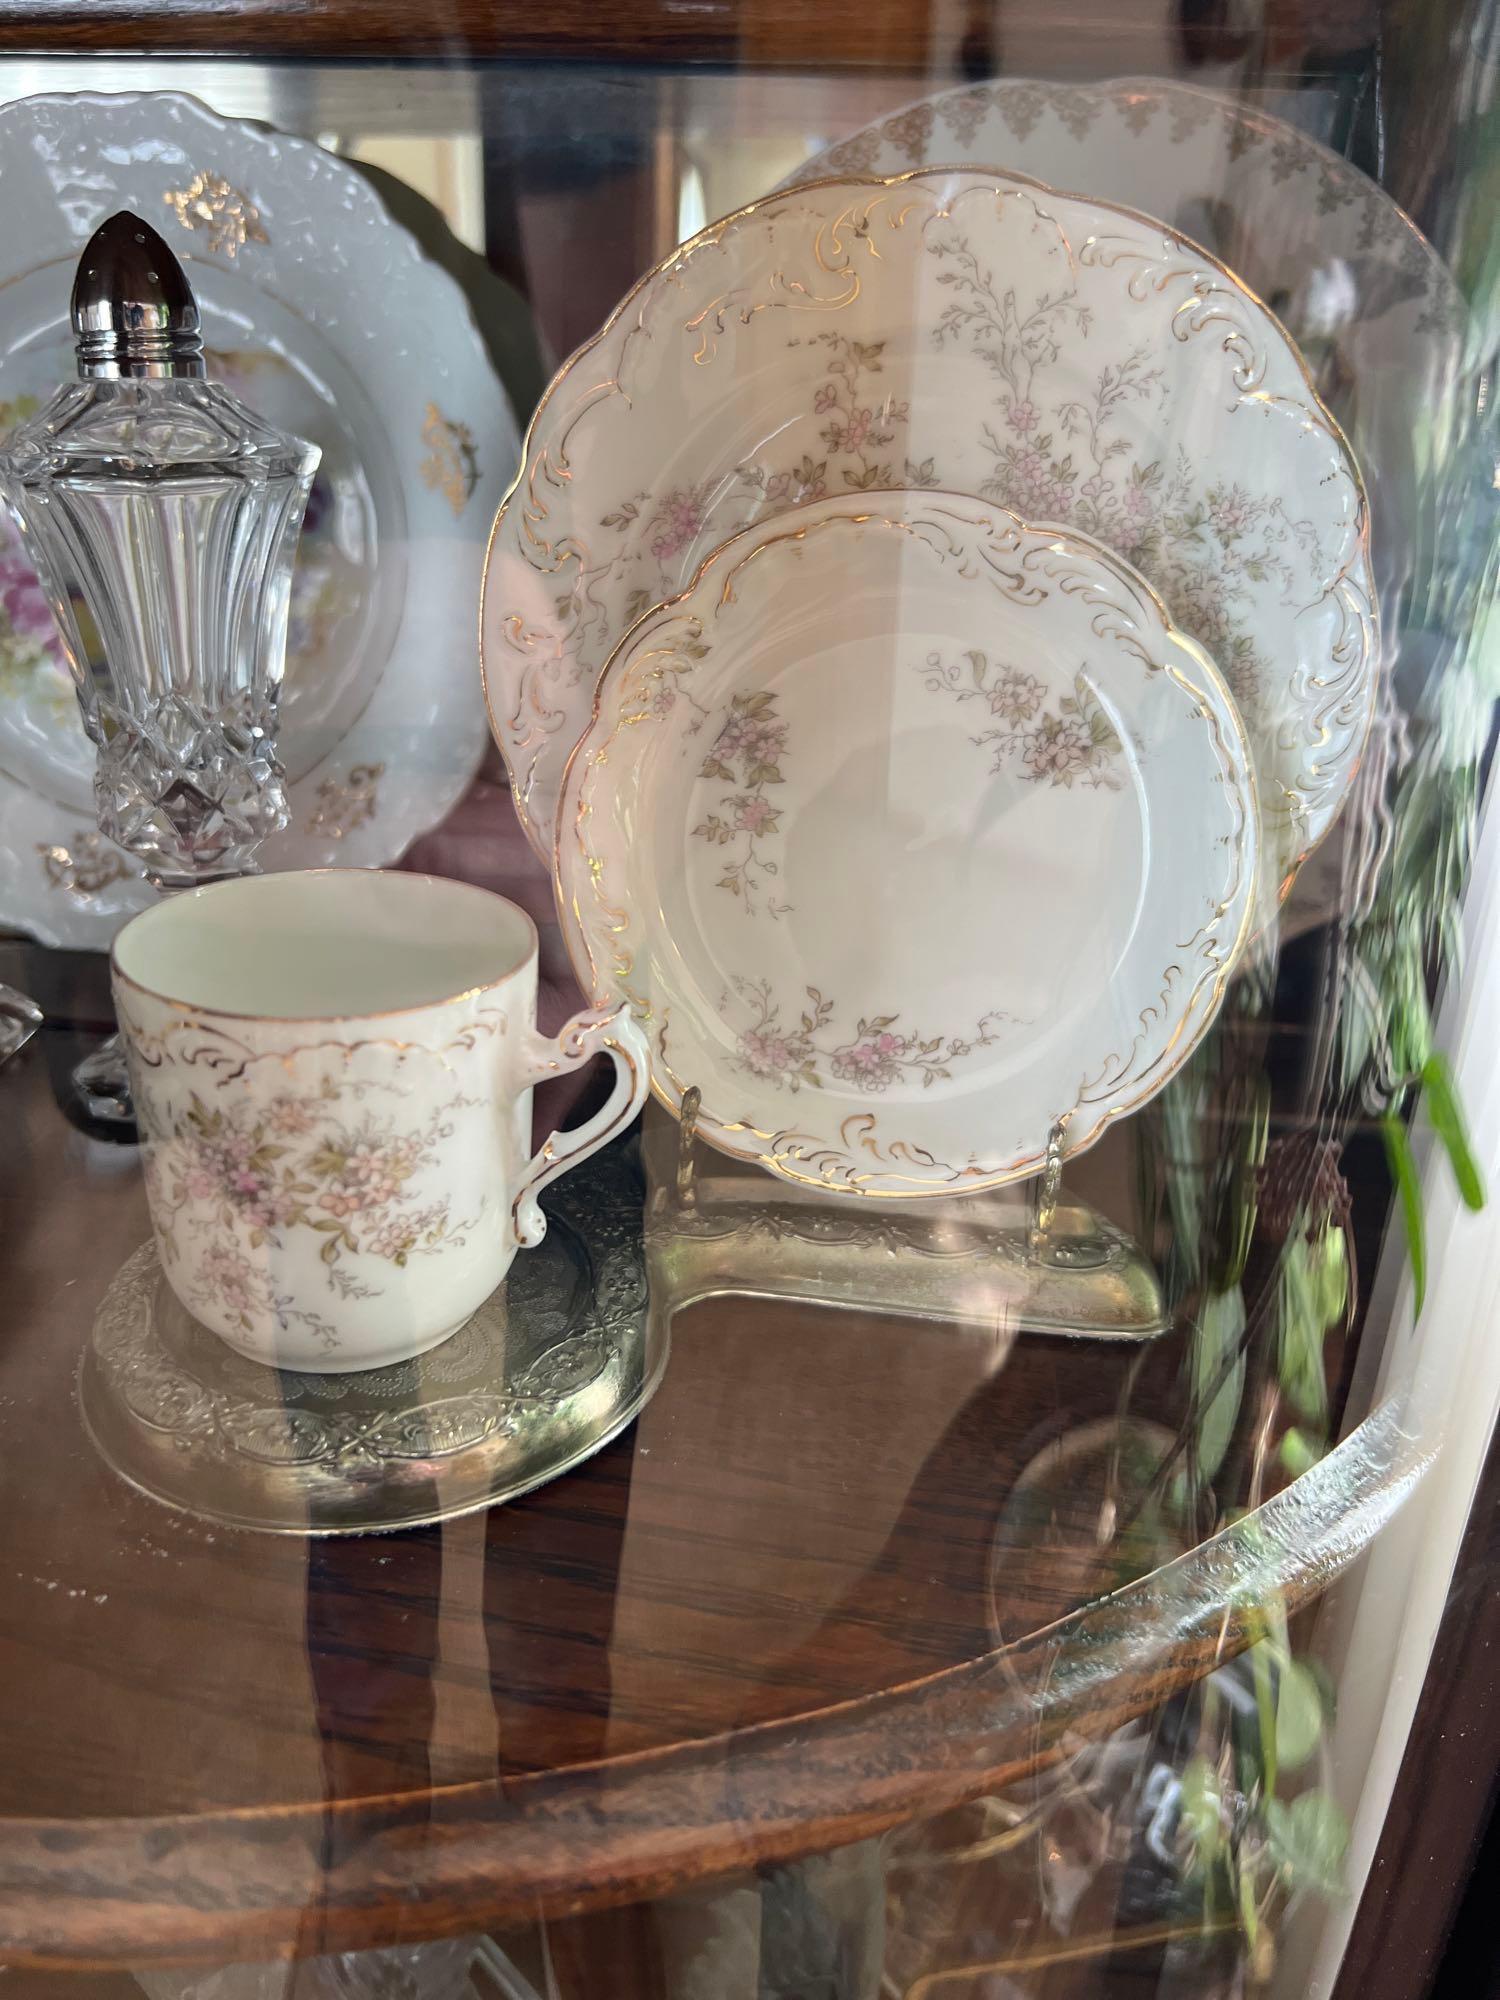 Glass Bowls, Decorative Plates, Glasses, Cups and Saucers